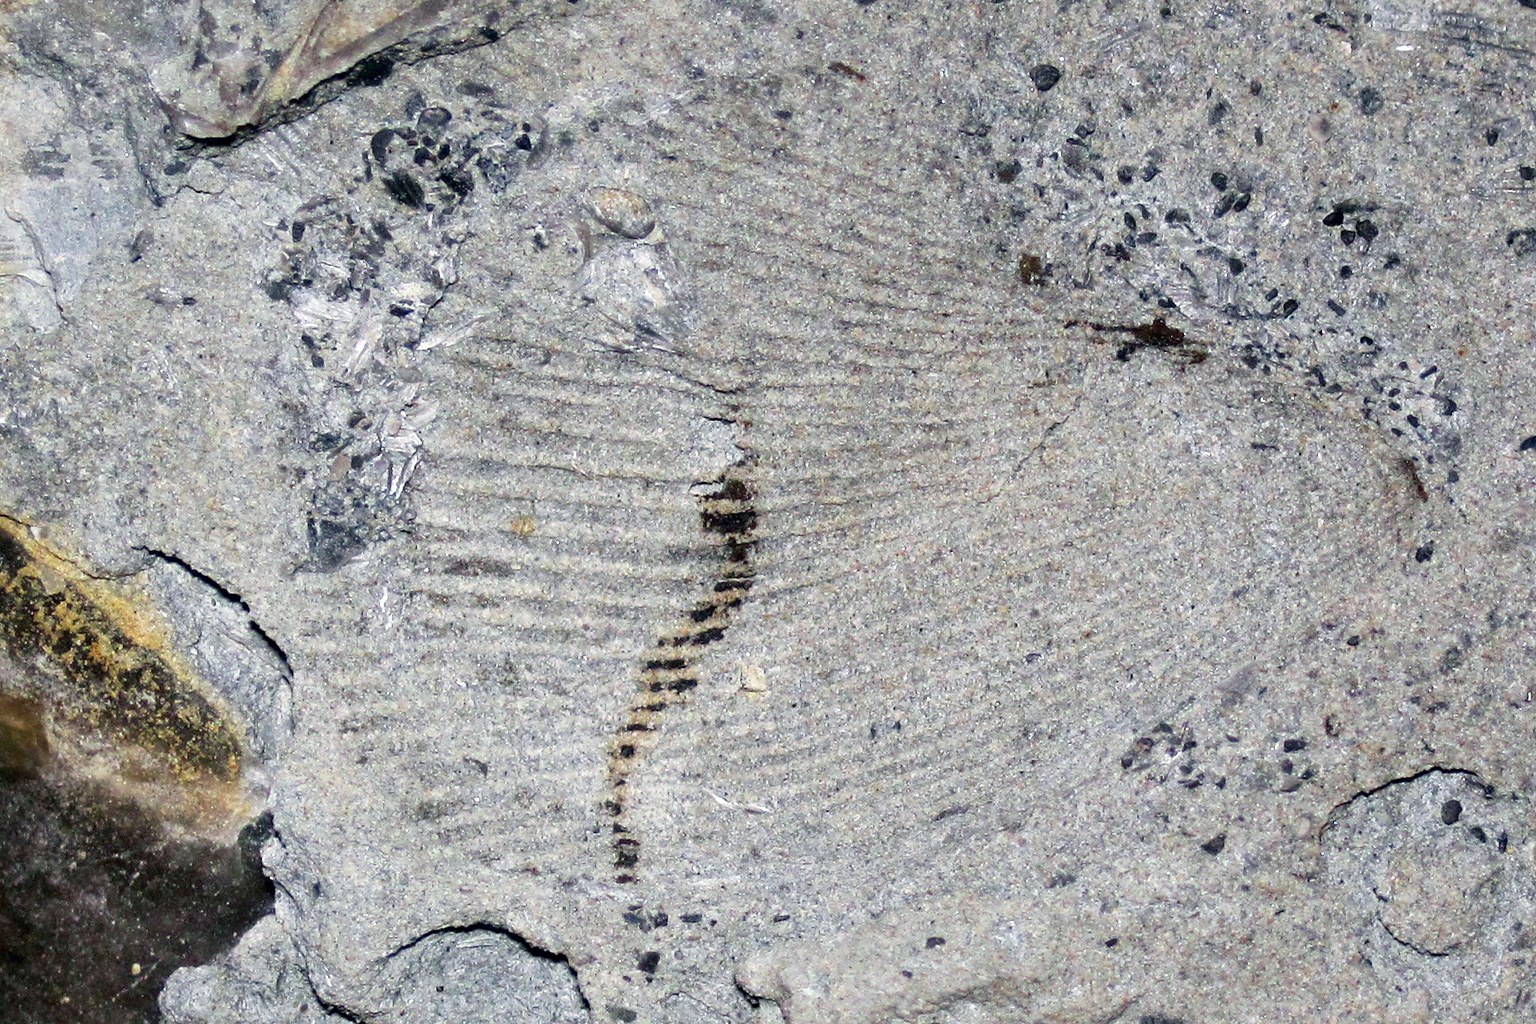 A fossil clam.